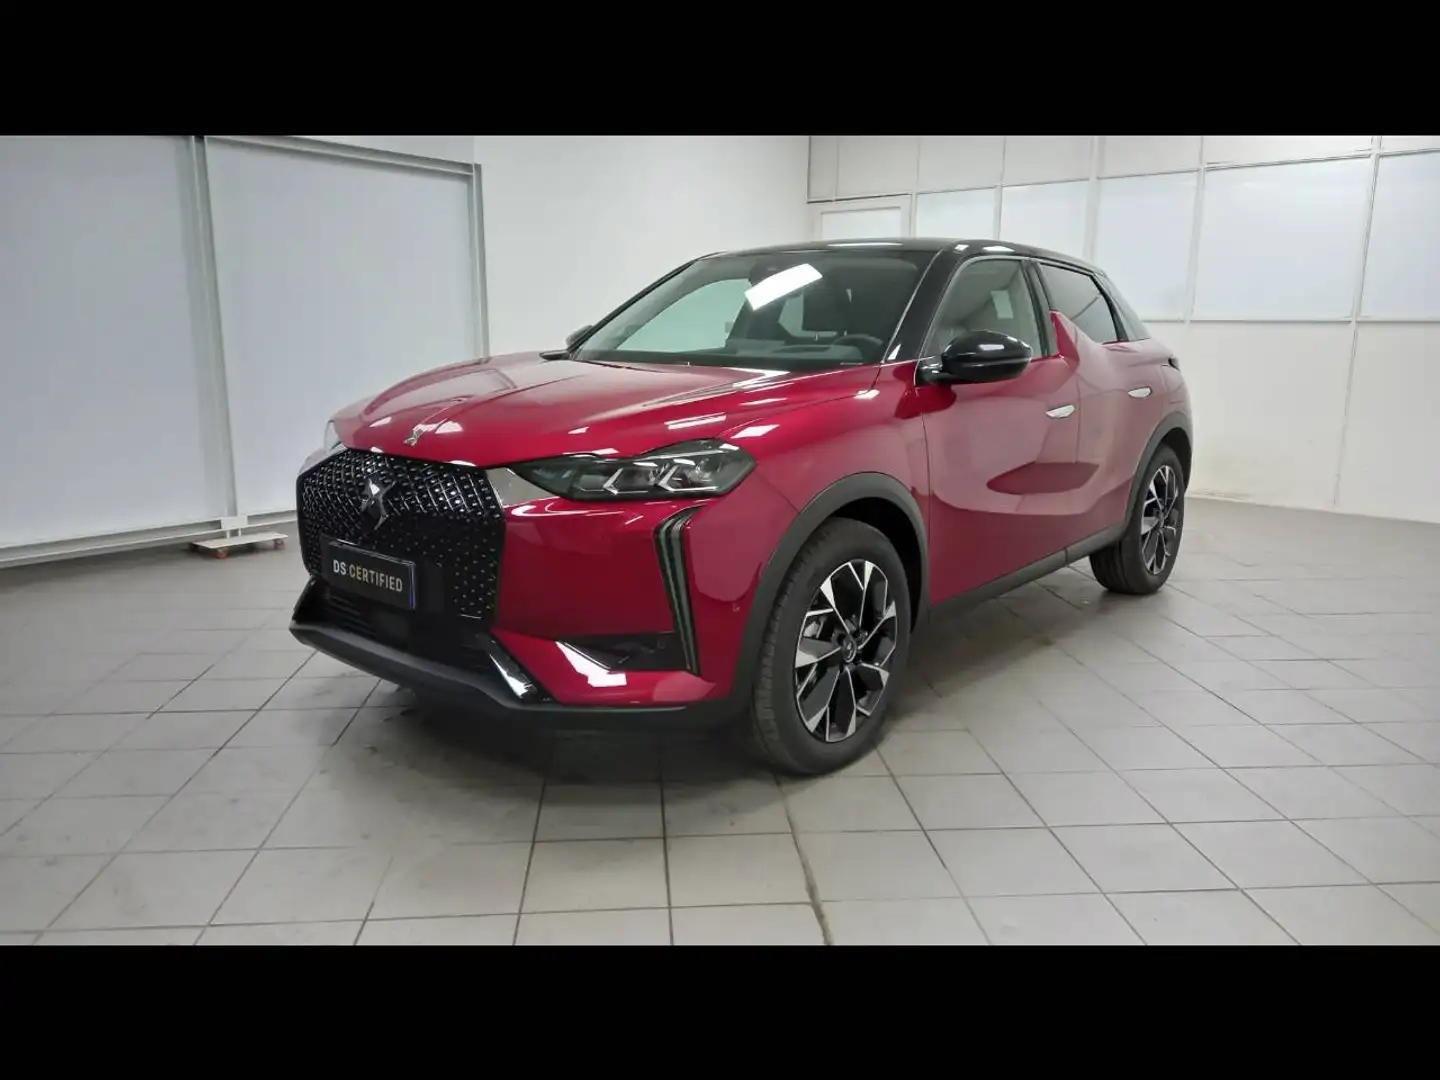 DS Automobiles DS 3 Crossback DS3 Crossback 50 kWh e-tense Grand Chic Rosso - 2